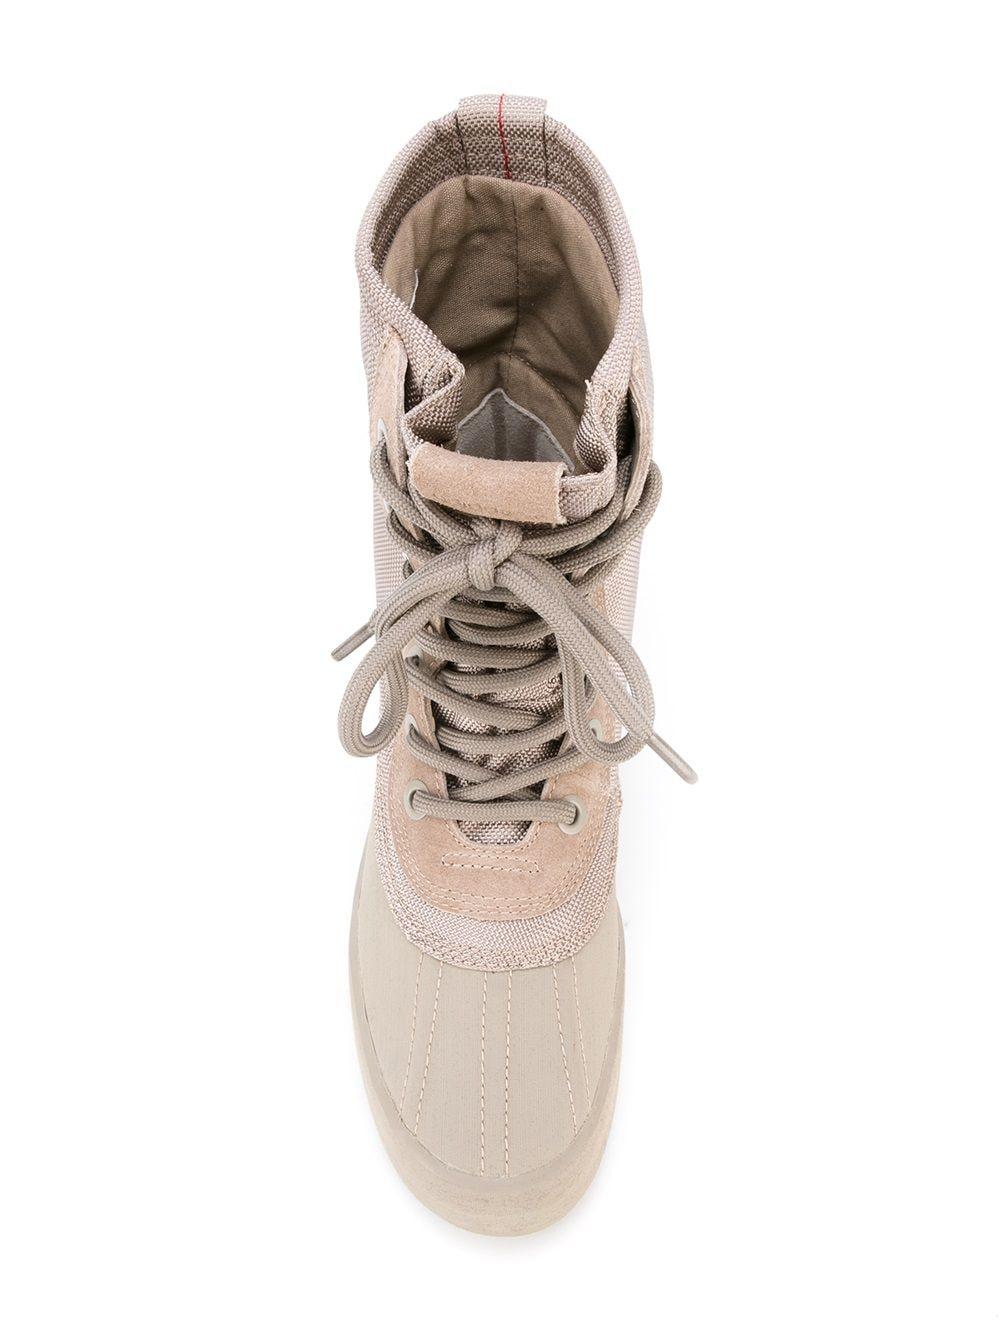 Yeezy Adidas Originals By Ye 950 Boots | Lyst